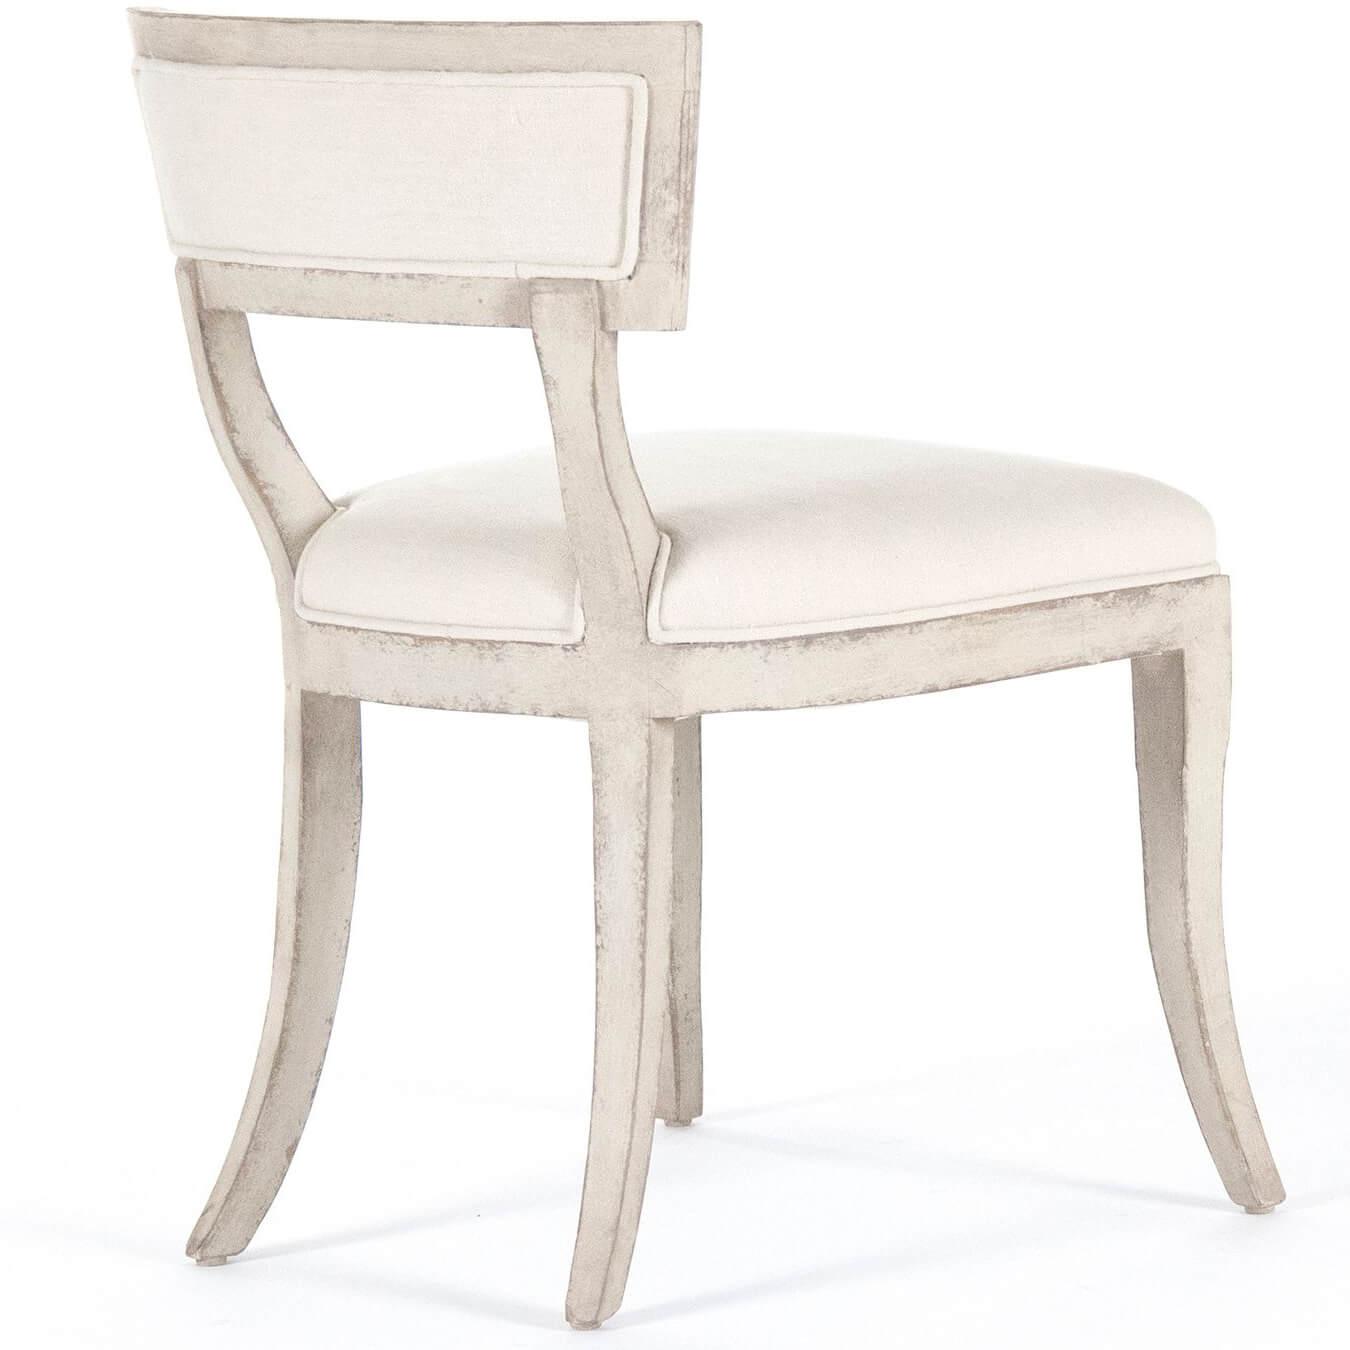 French Shabby Chic Side Chairs - Belle Escape